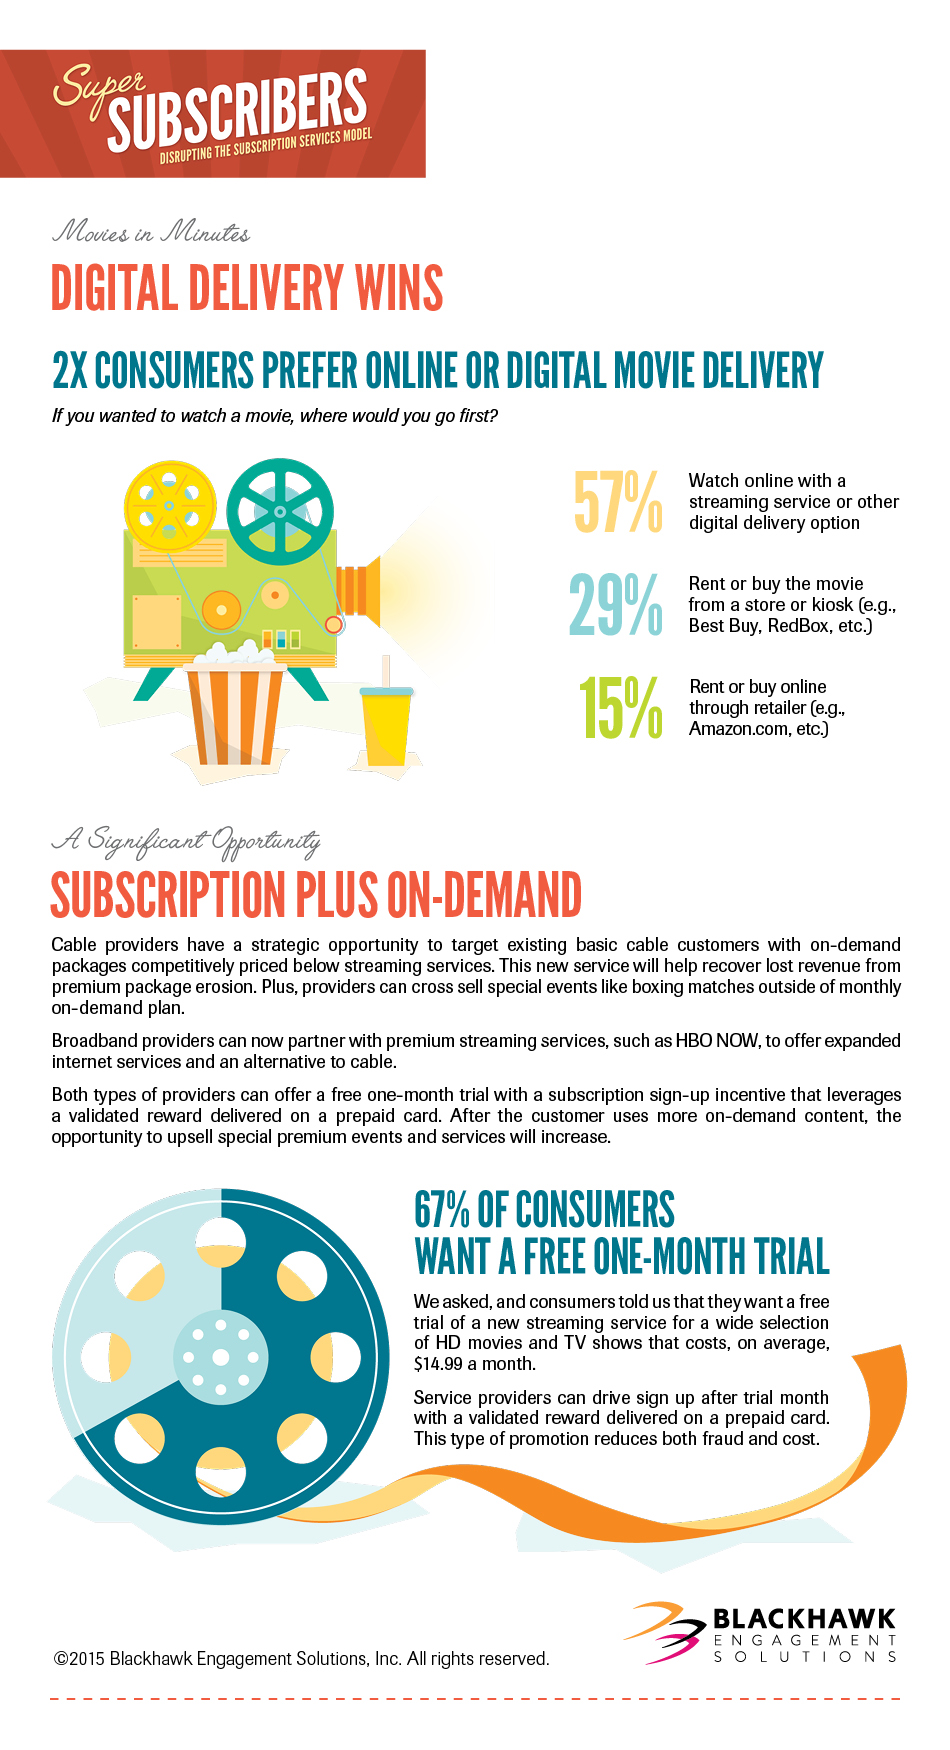 2X consumers prefer online or digital movie delivery, and subscription plus on-demand is a significant opportunity.